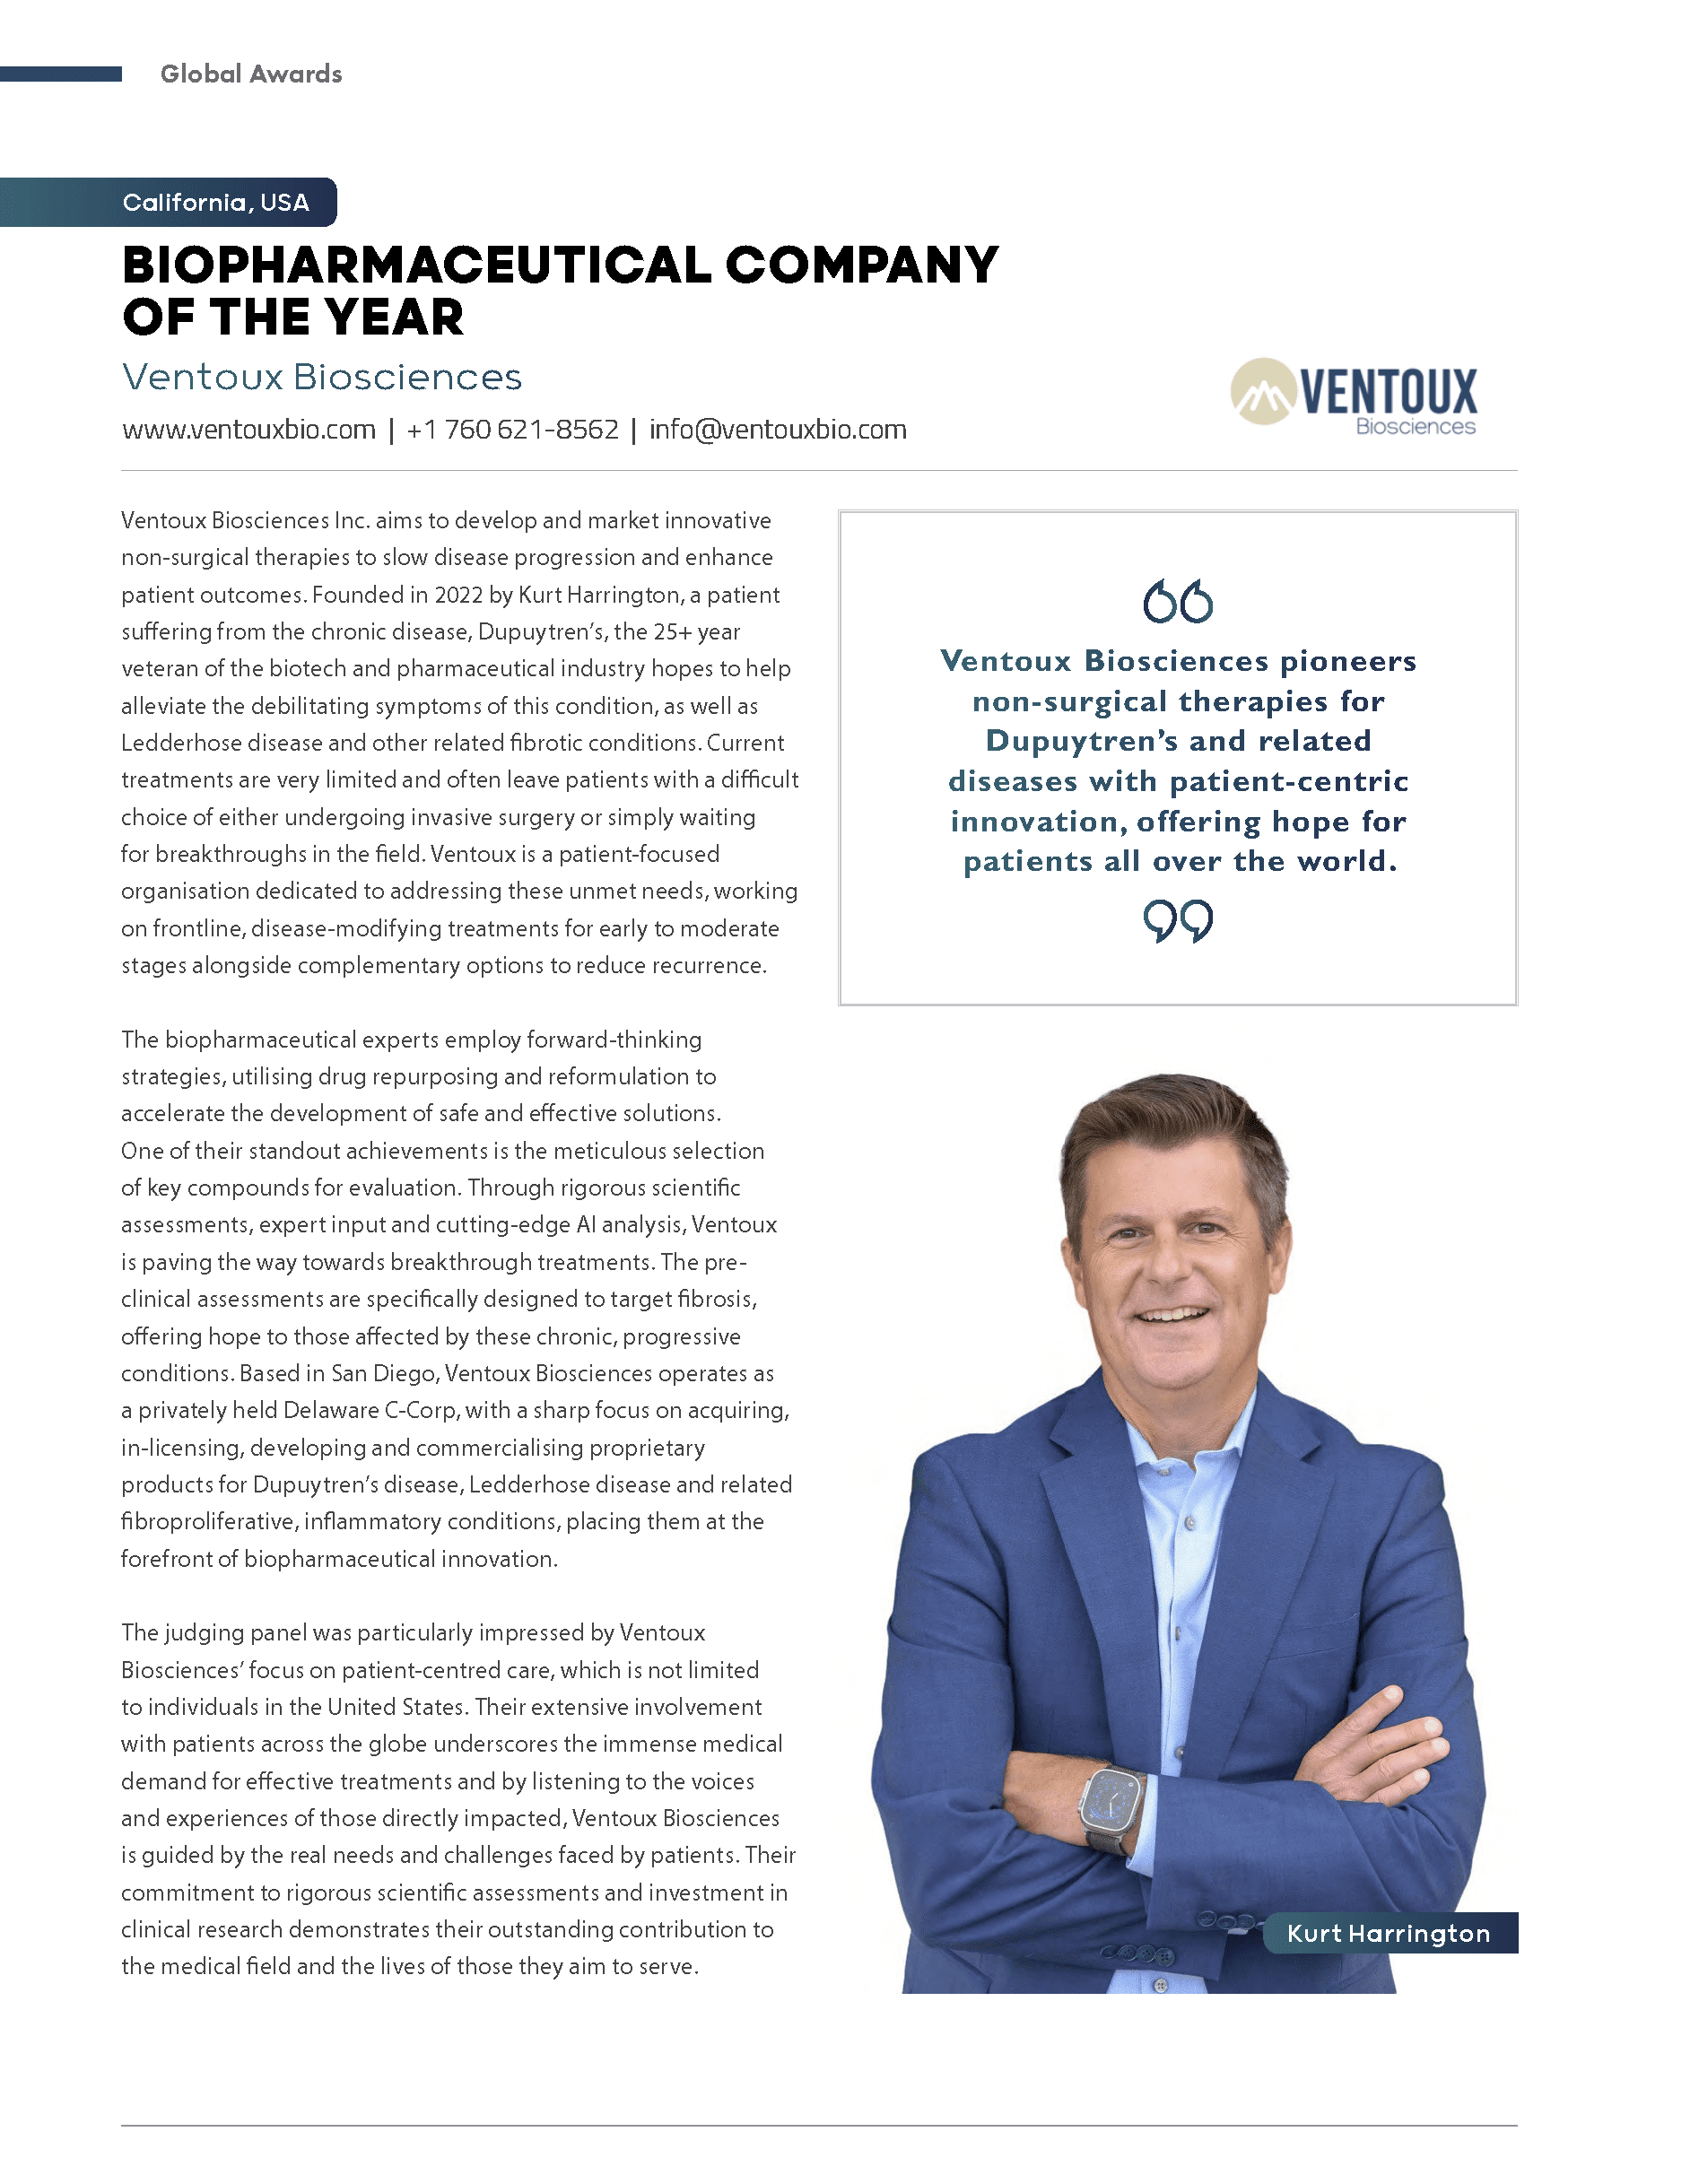 Biopharmaceutical Company of the Year: Ventoux Biosciences 